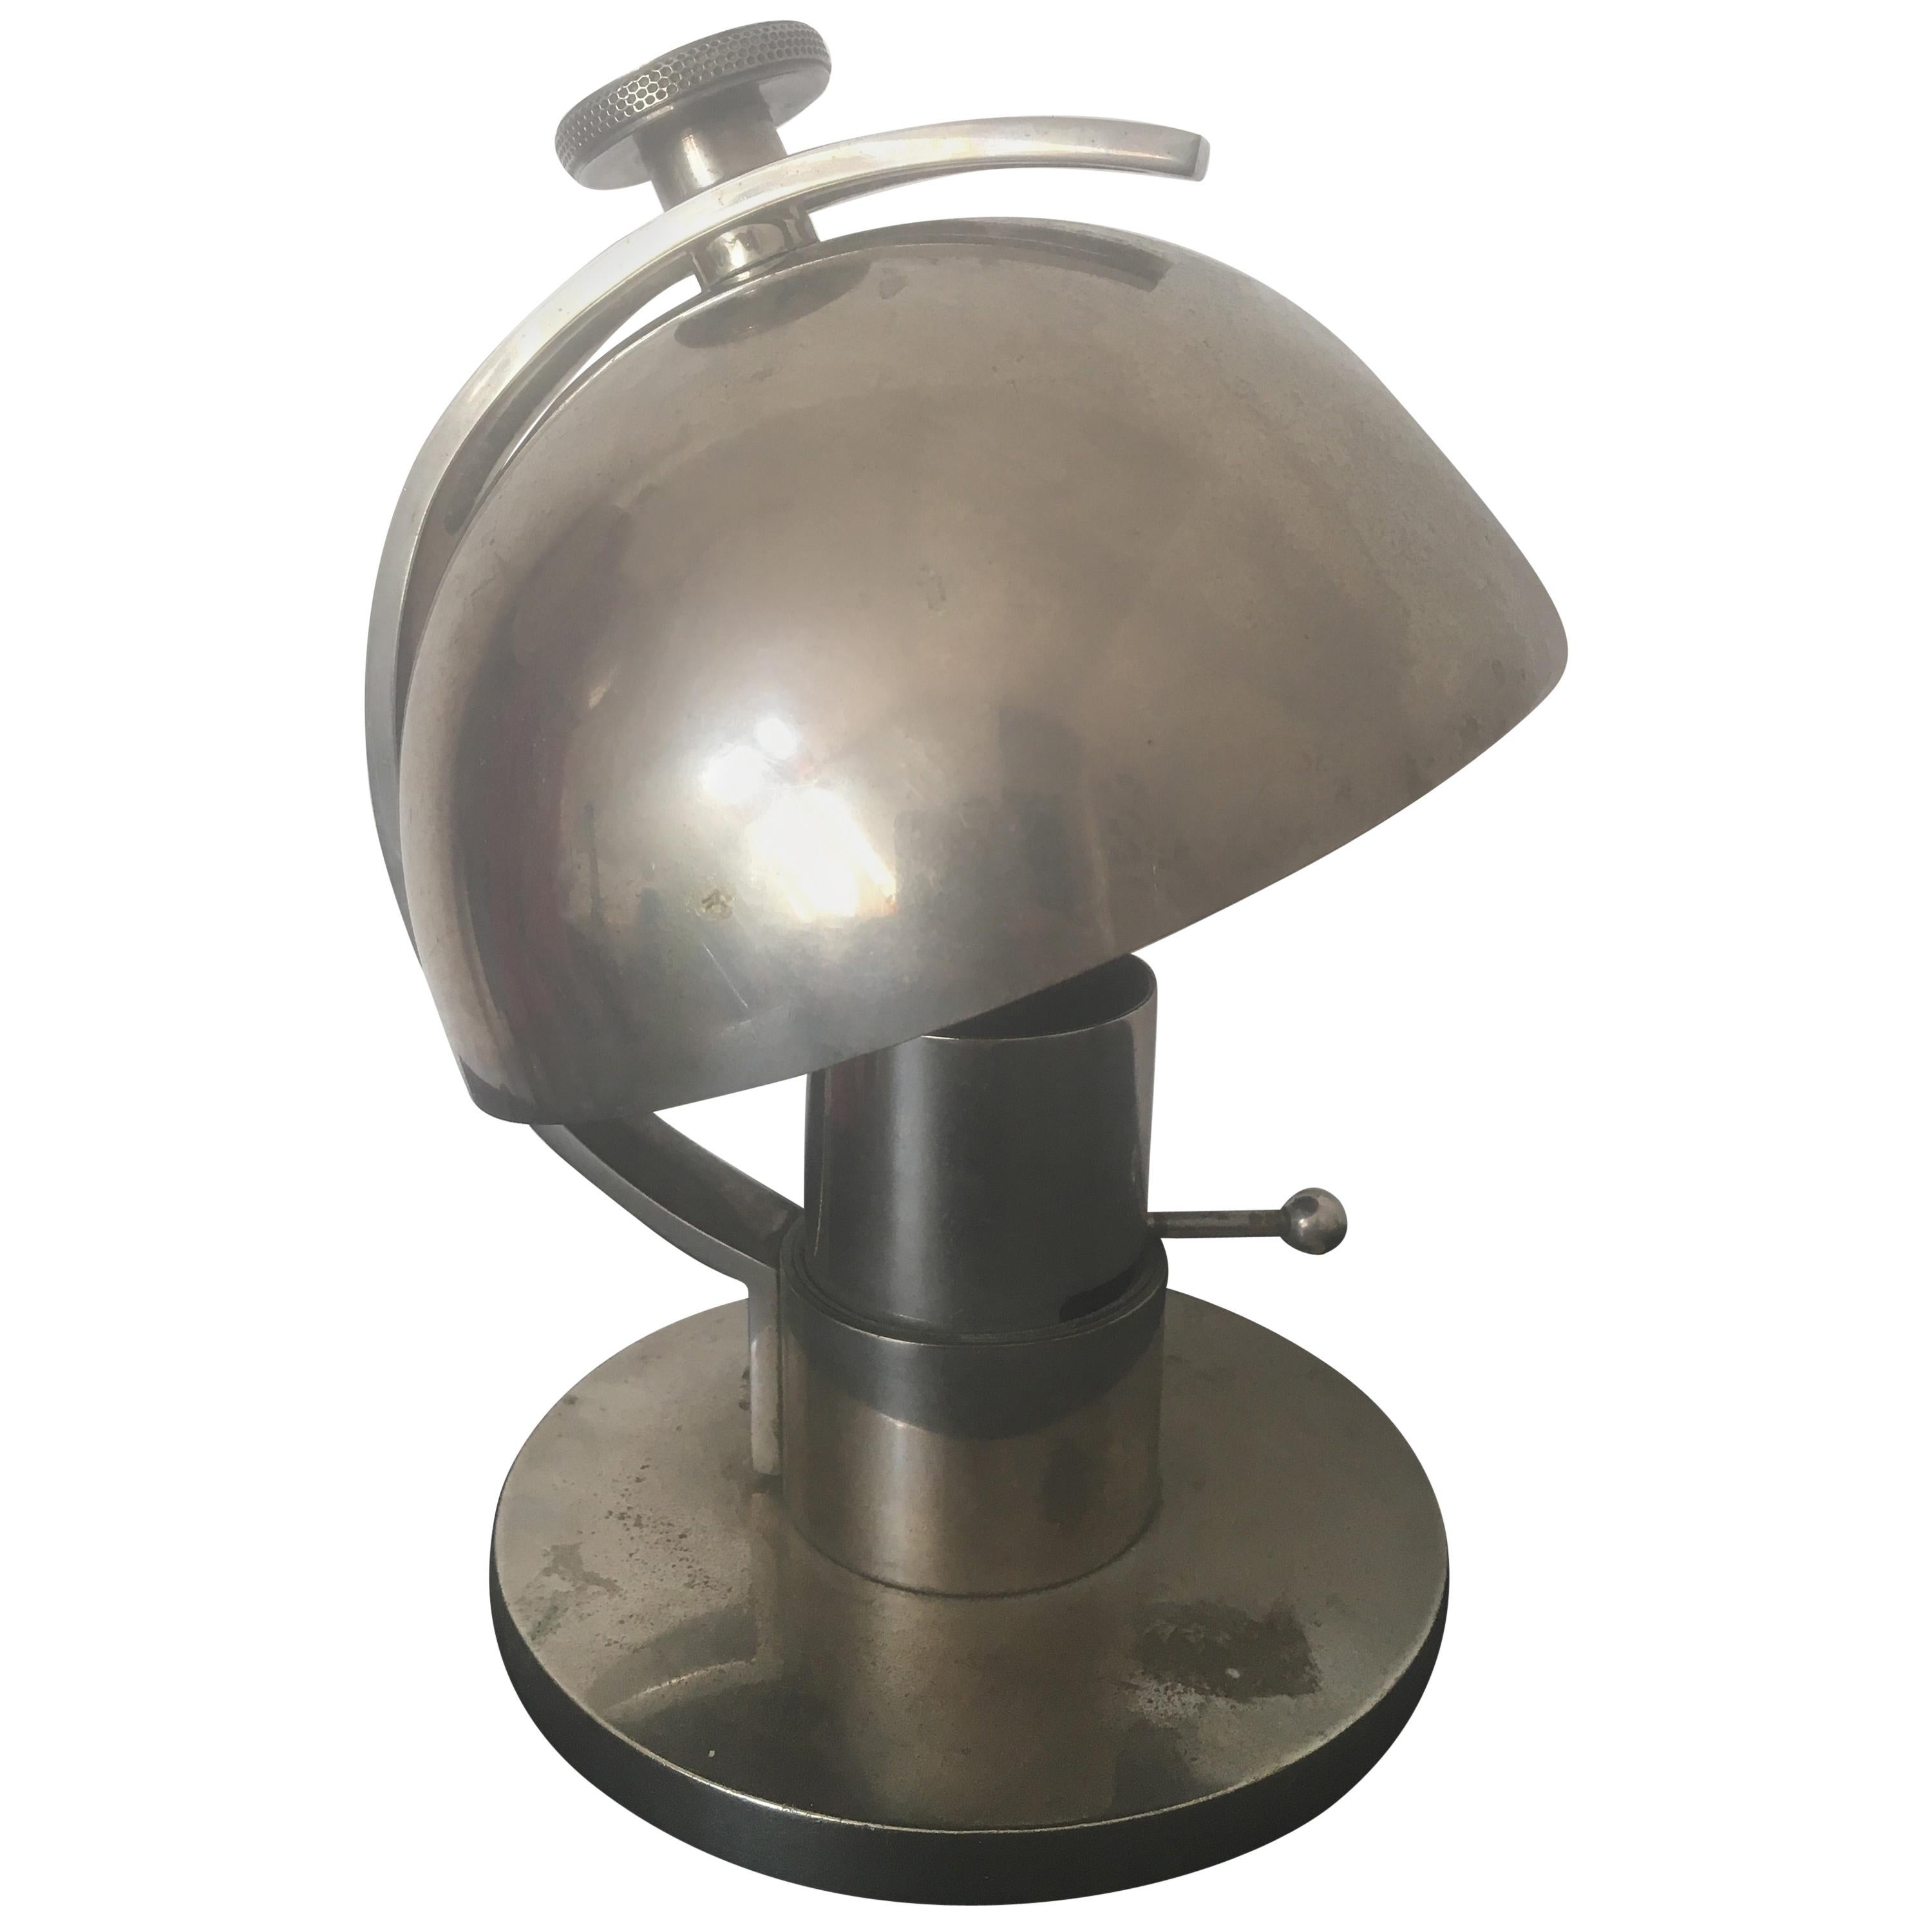 Maison Desny Art Deco Modernist Nickeled Metal Table Lamp, French, 1930s For Sale